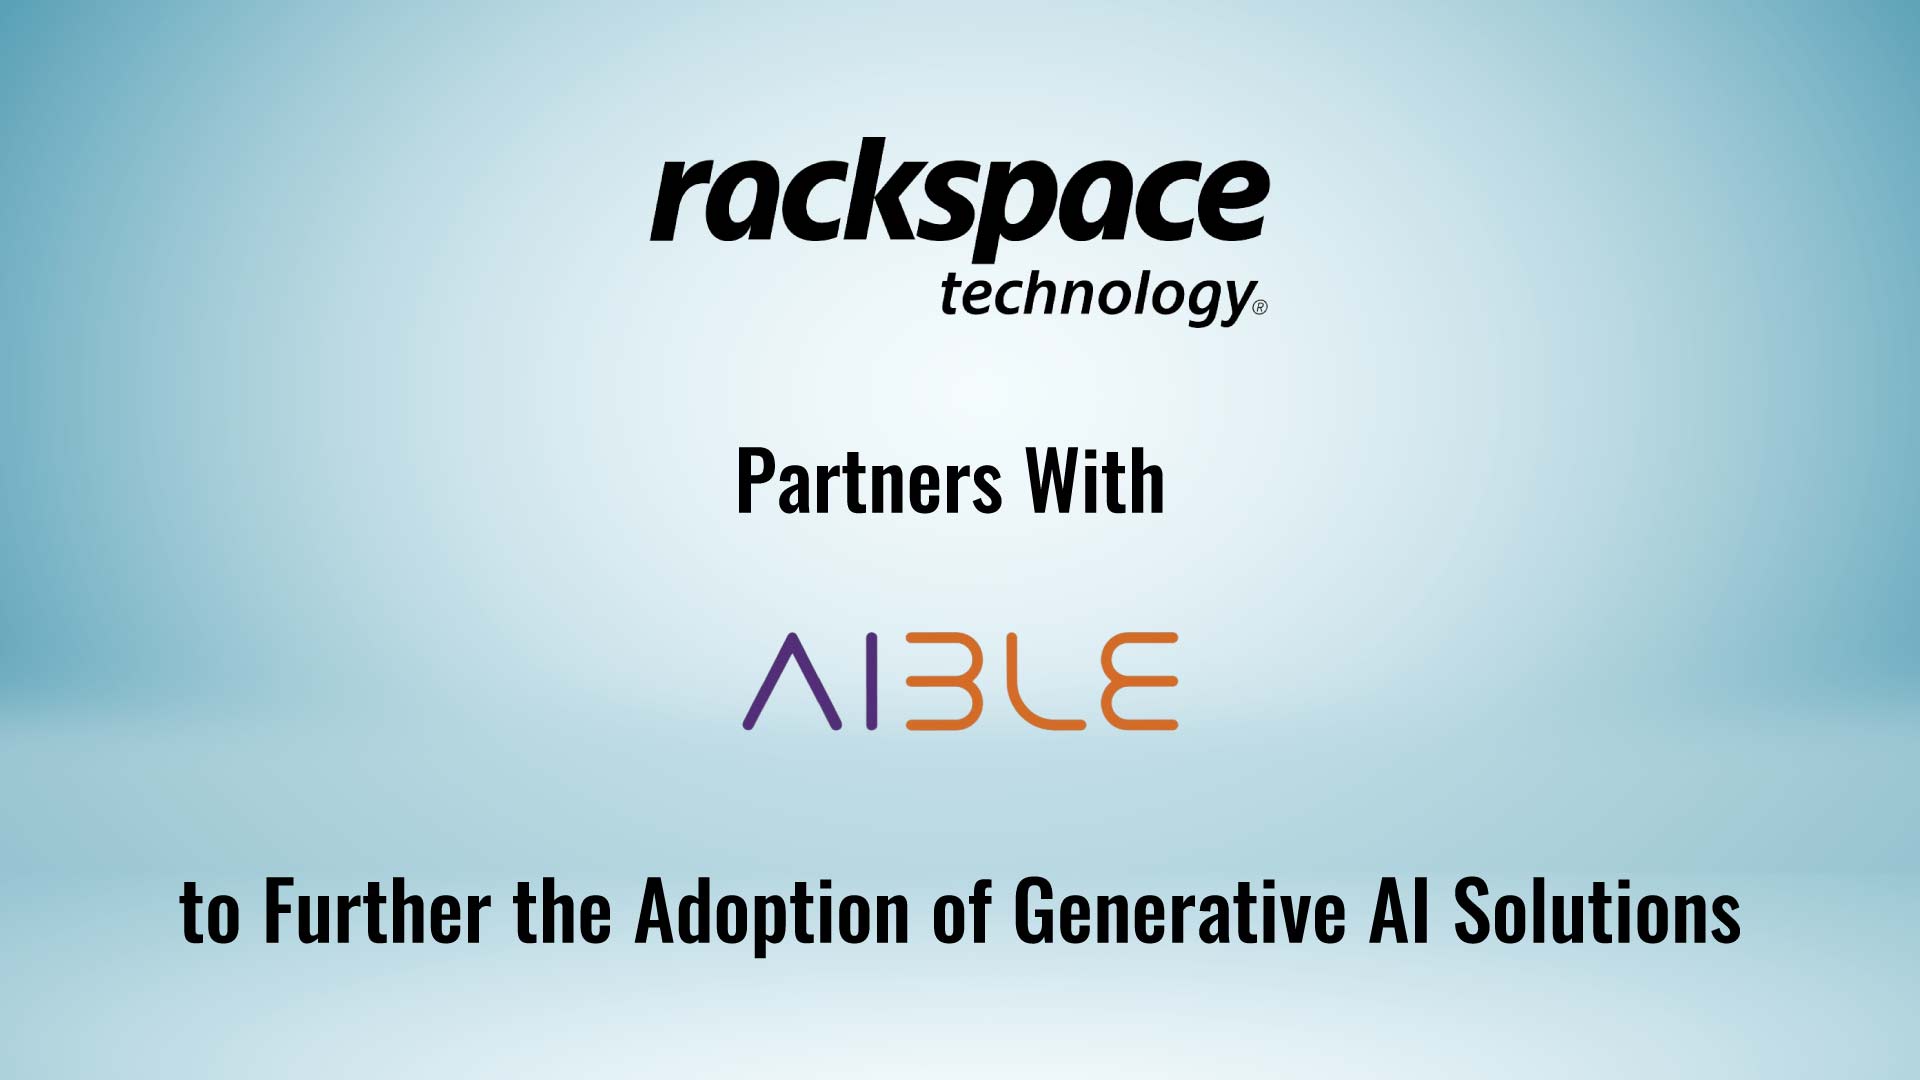 Rackspace Technology Partners with Aible to Further the Adoption of Generative AI Solutions and Enable Enterprise-scale Data Analysis and Data Storytelling